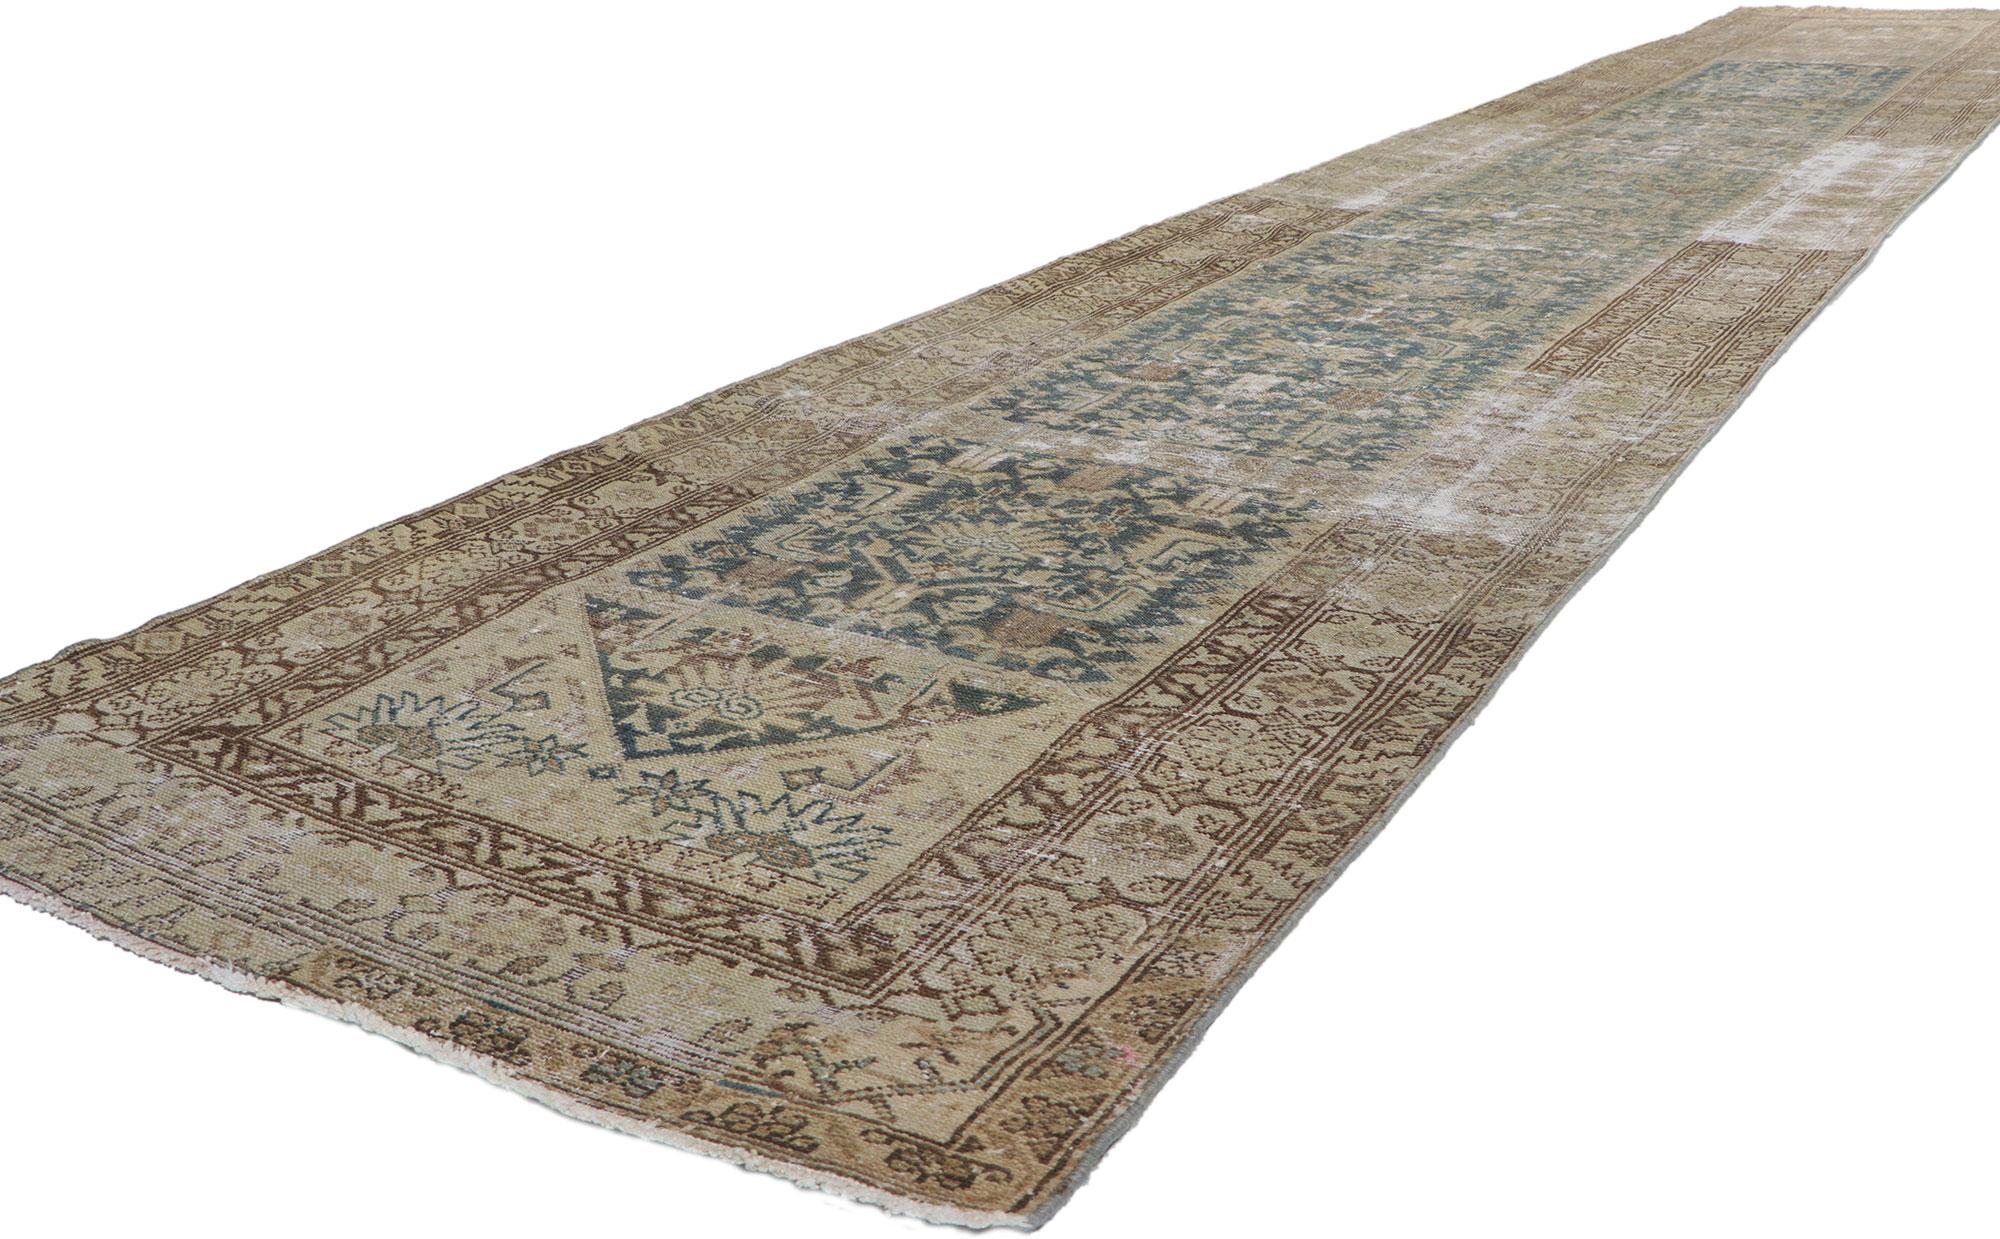 60962 Distressed Antique Persian Malayer Runner with Herati Pattern 03'02 x 19'03. With its rugged beauty and rustic sensibility, this hand knotted wool distressed antique Persian Malayer runner will take on a curated lived-in look that feels